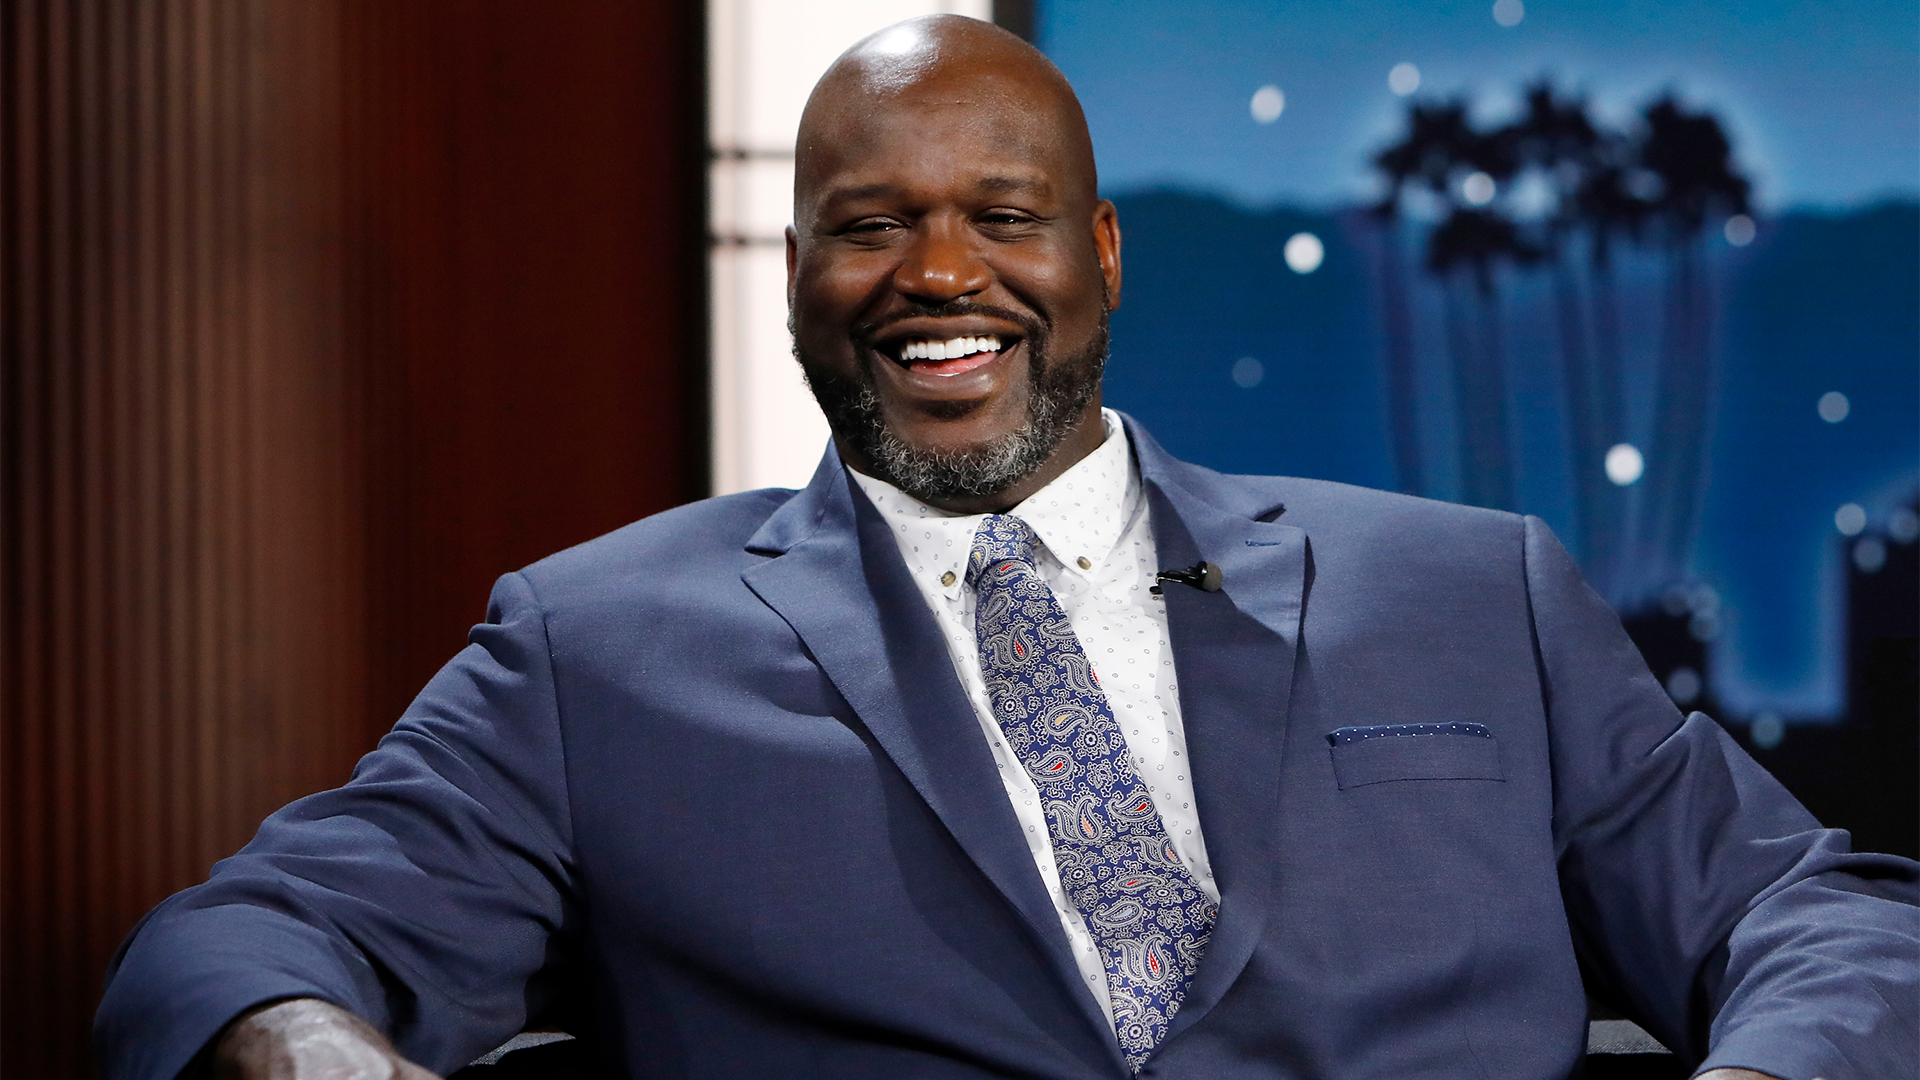 Shaquille O'Neal Shares Why Gamers Should Be Considered Athletes: 'I Can’t Do What You Do'